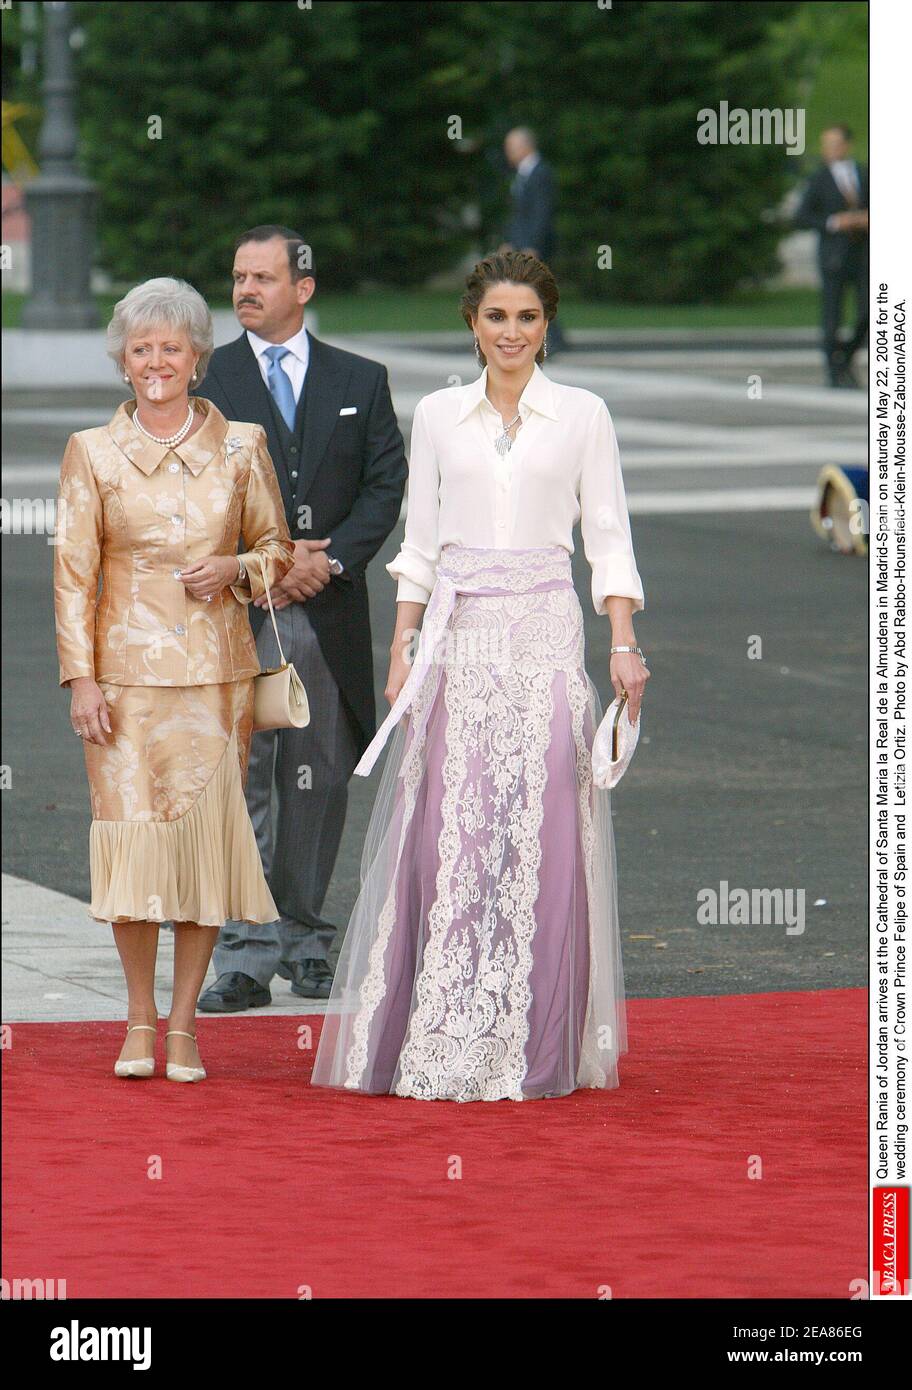 Queen Rania of Jordan and Princess Mona of Jordan arrive at the Cathedral of Santa Maria la Real de la Almudena in Madrid-Spain on saturday May 22, 2004 for the wedding ceremony of Crown Prince Felipe of Spain and Letizia Ortiz. Photo by Abd Rabbo-Hounsfield-Klein-Mousse-Zabulon/ABACA. Stock Photo